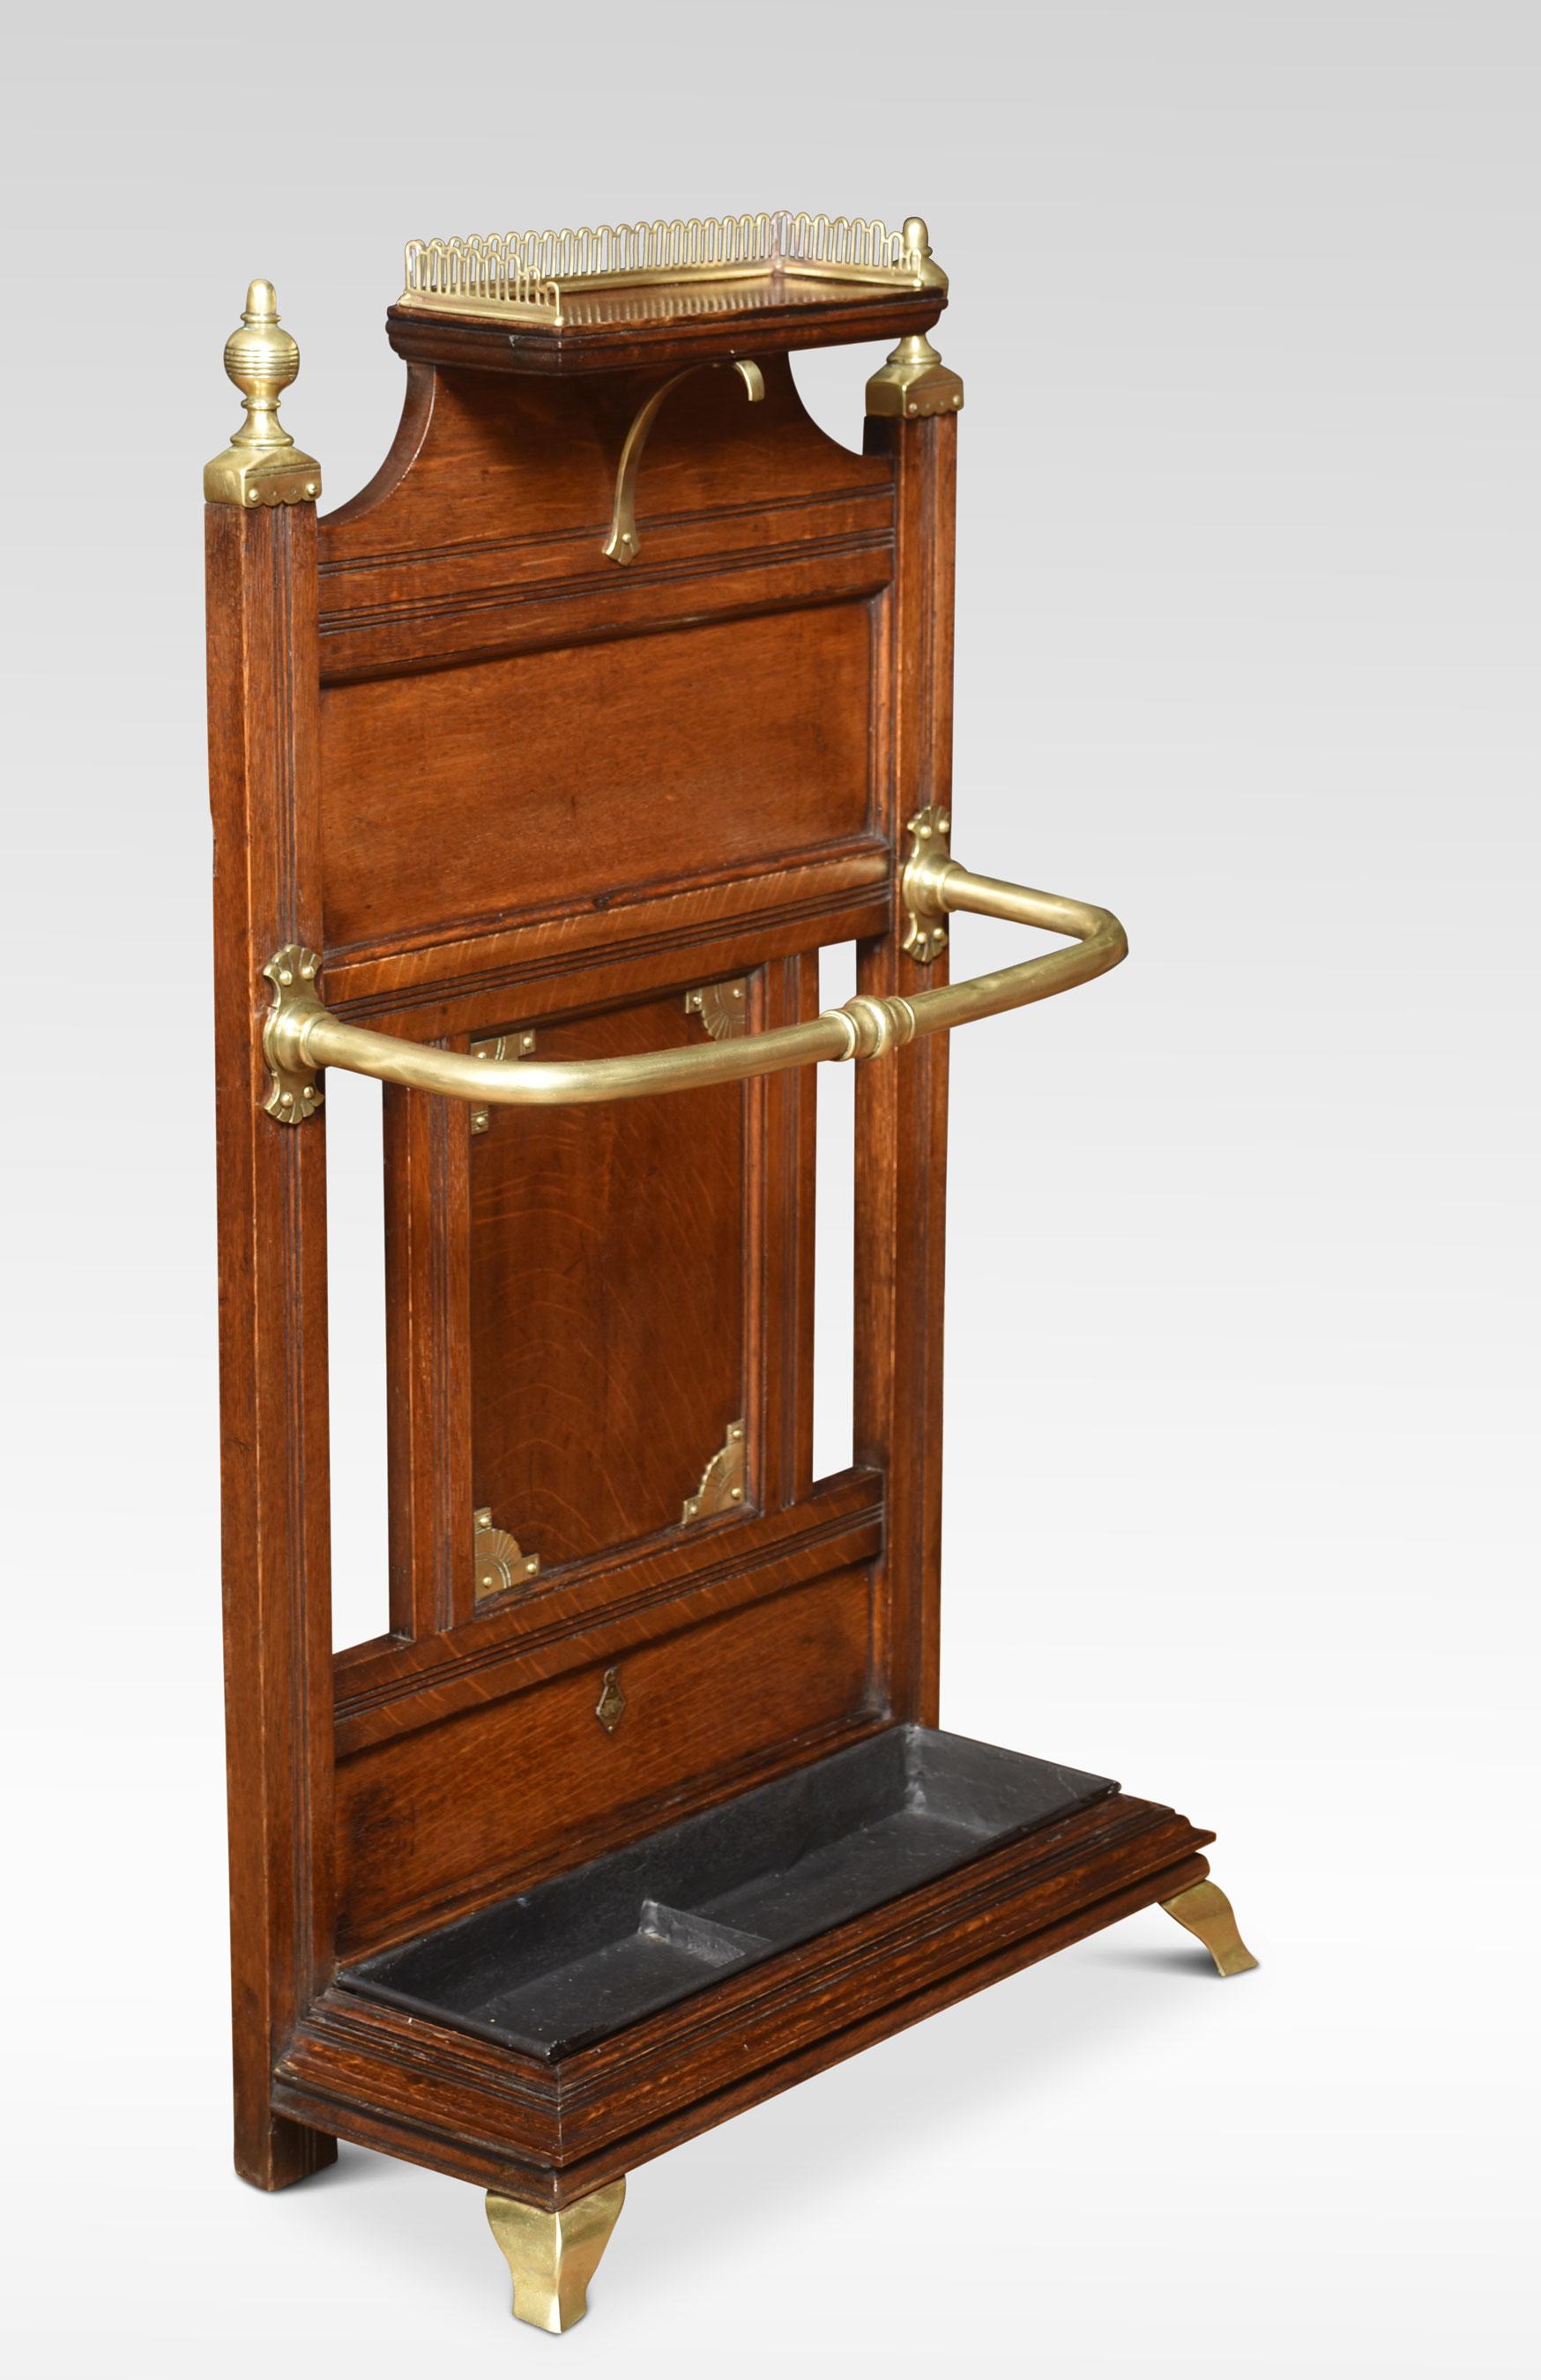 Oak and brass mounted stick stand by James Shoolbred and Co. Having raised three-quarter pierced gallery above a paneled back with turned brass finials and stick/umbrella holder to the molded base supporting a drip pan. All raised up on brass